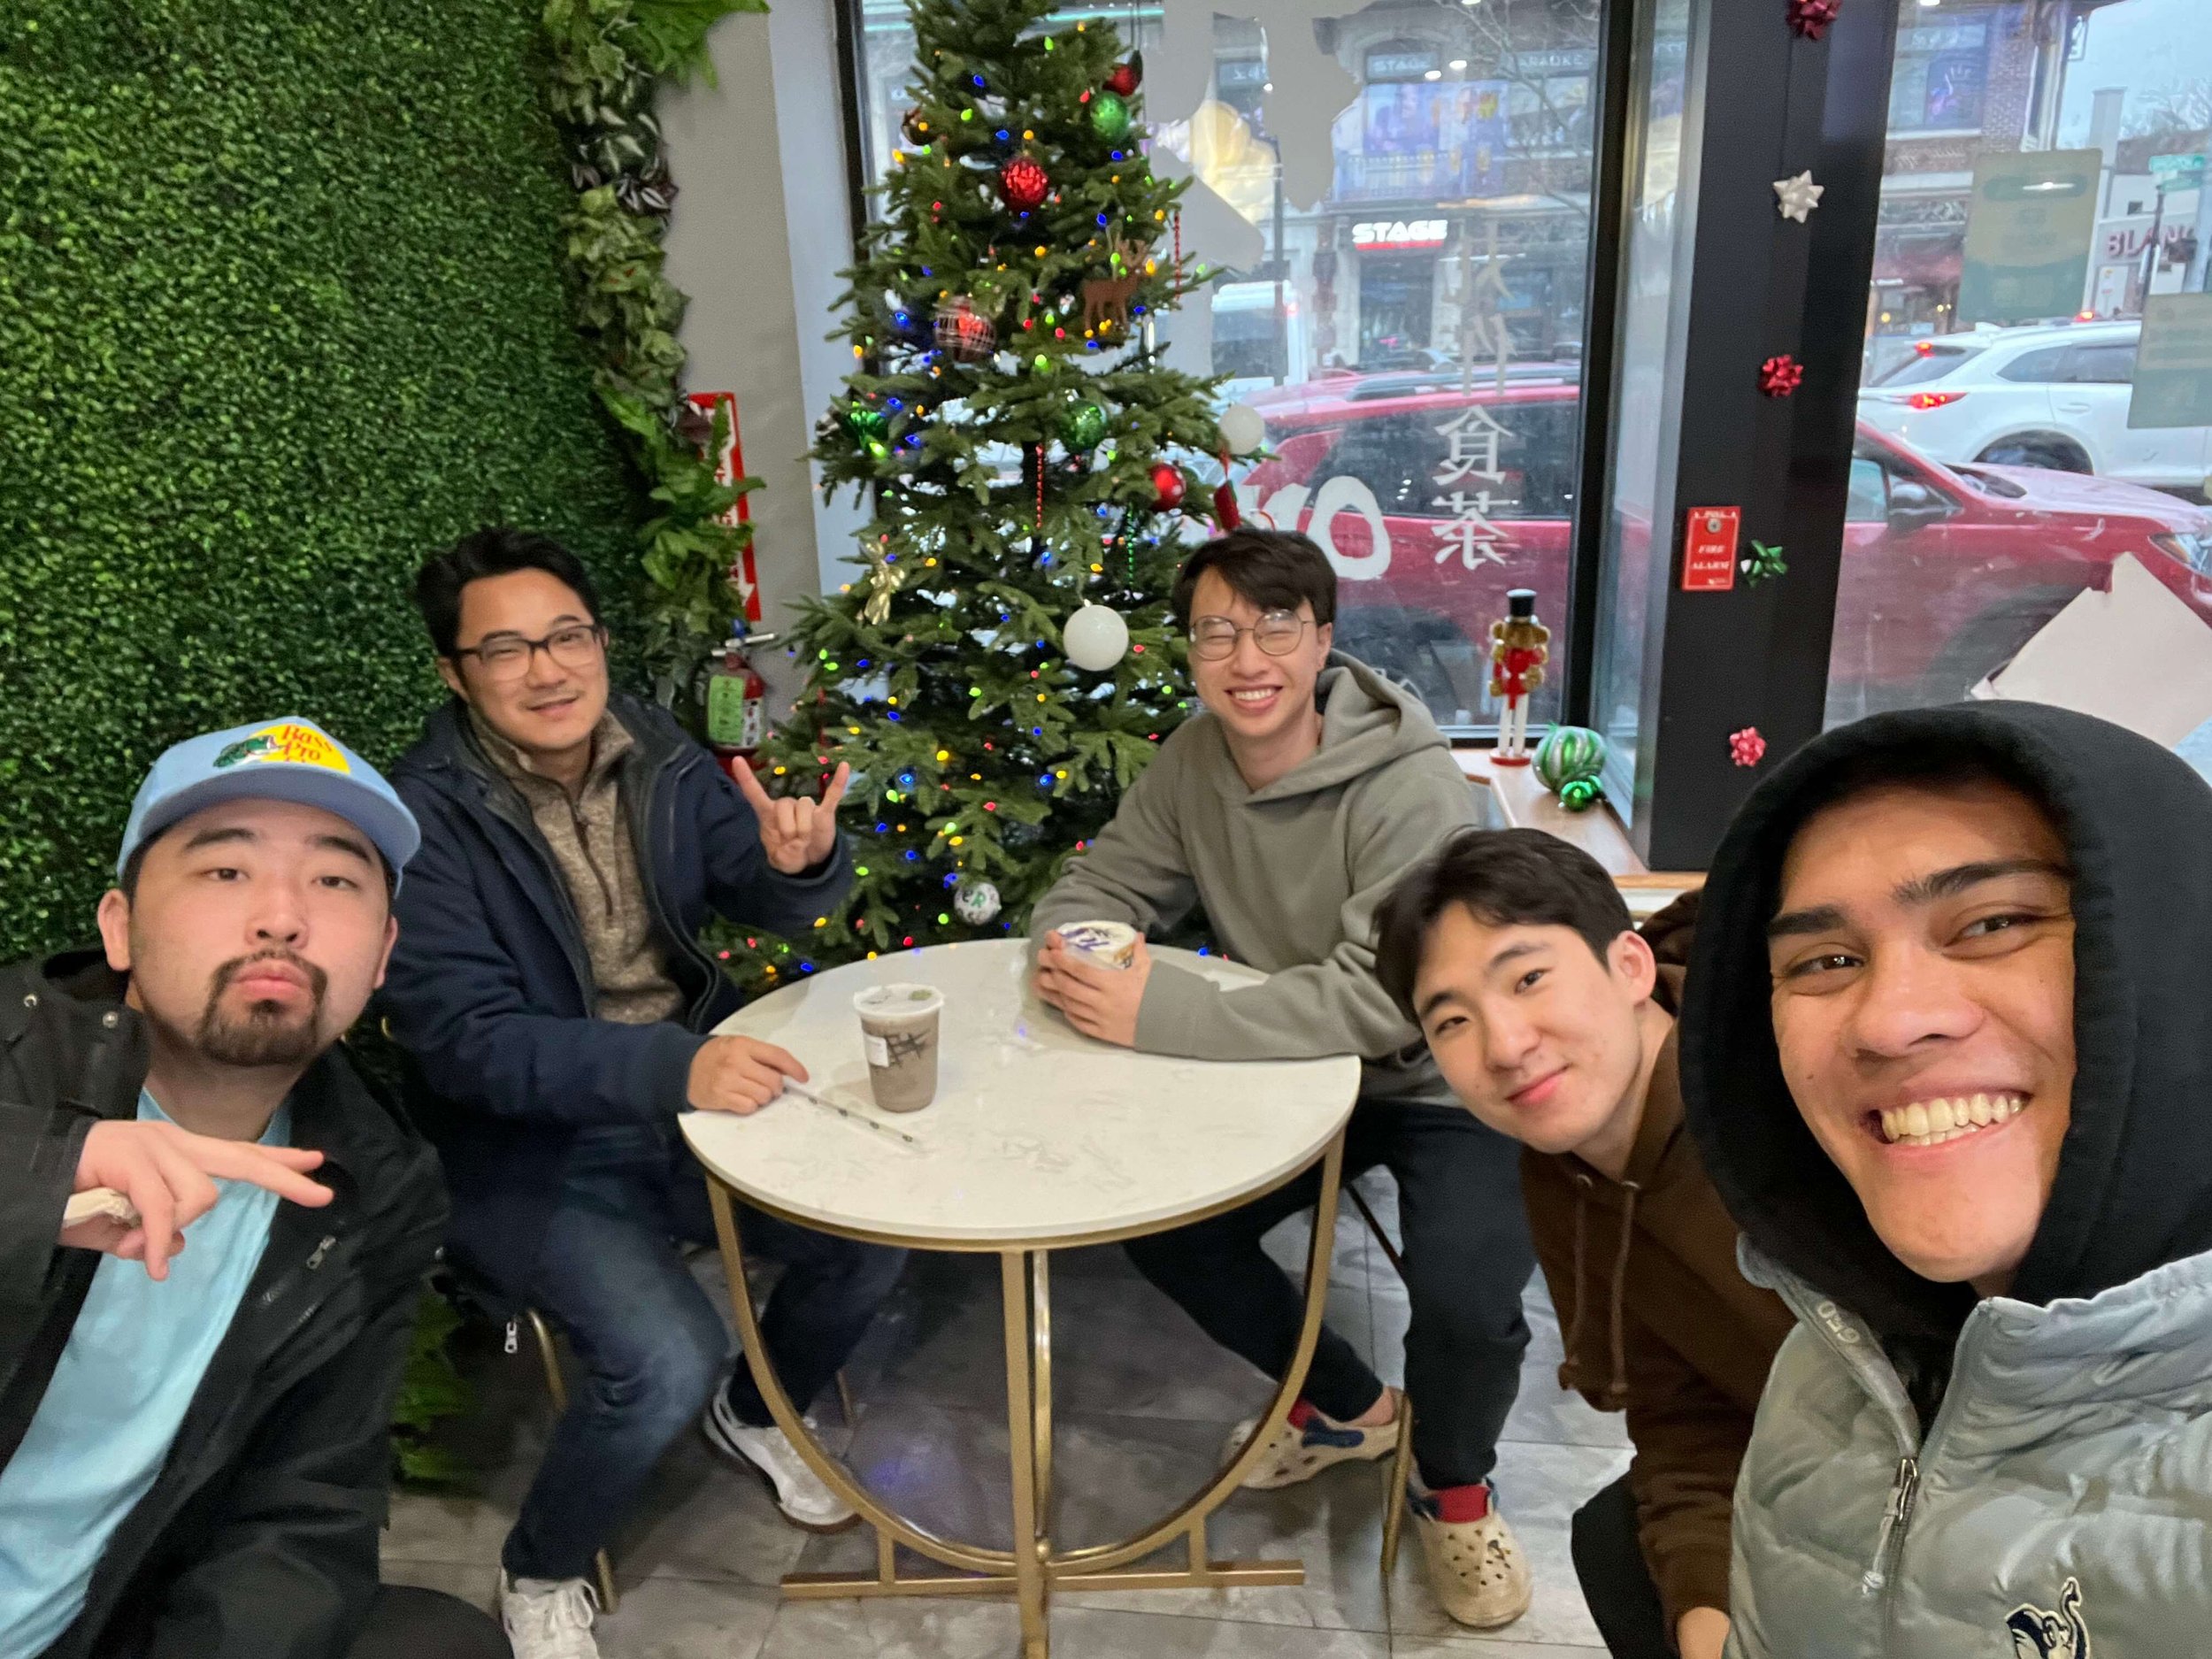 Charlie grabbing boba with some of the other Reclaimer College Church mentors